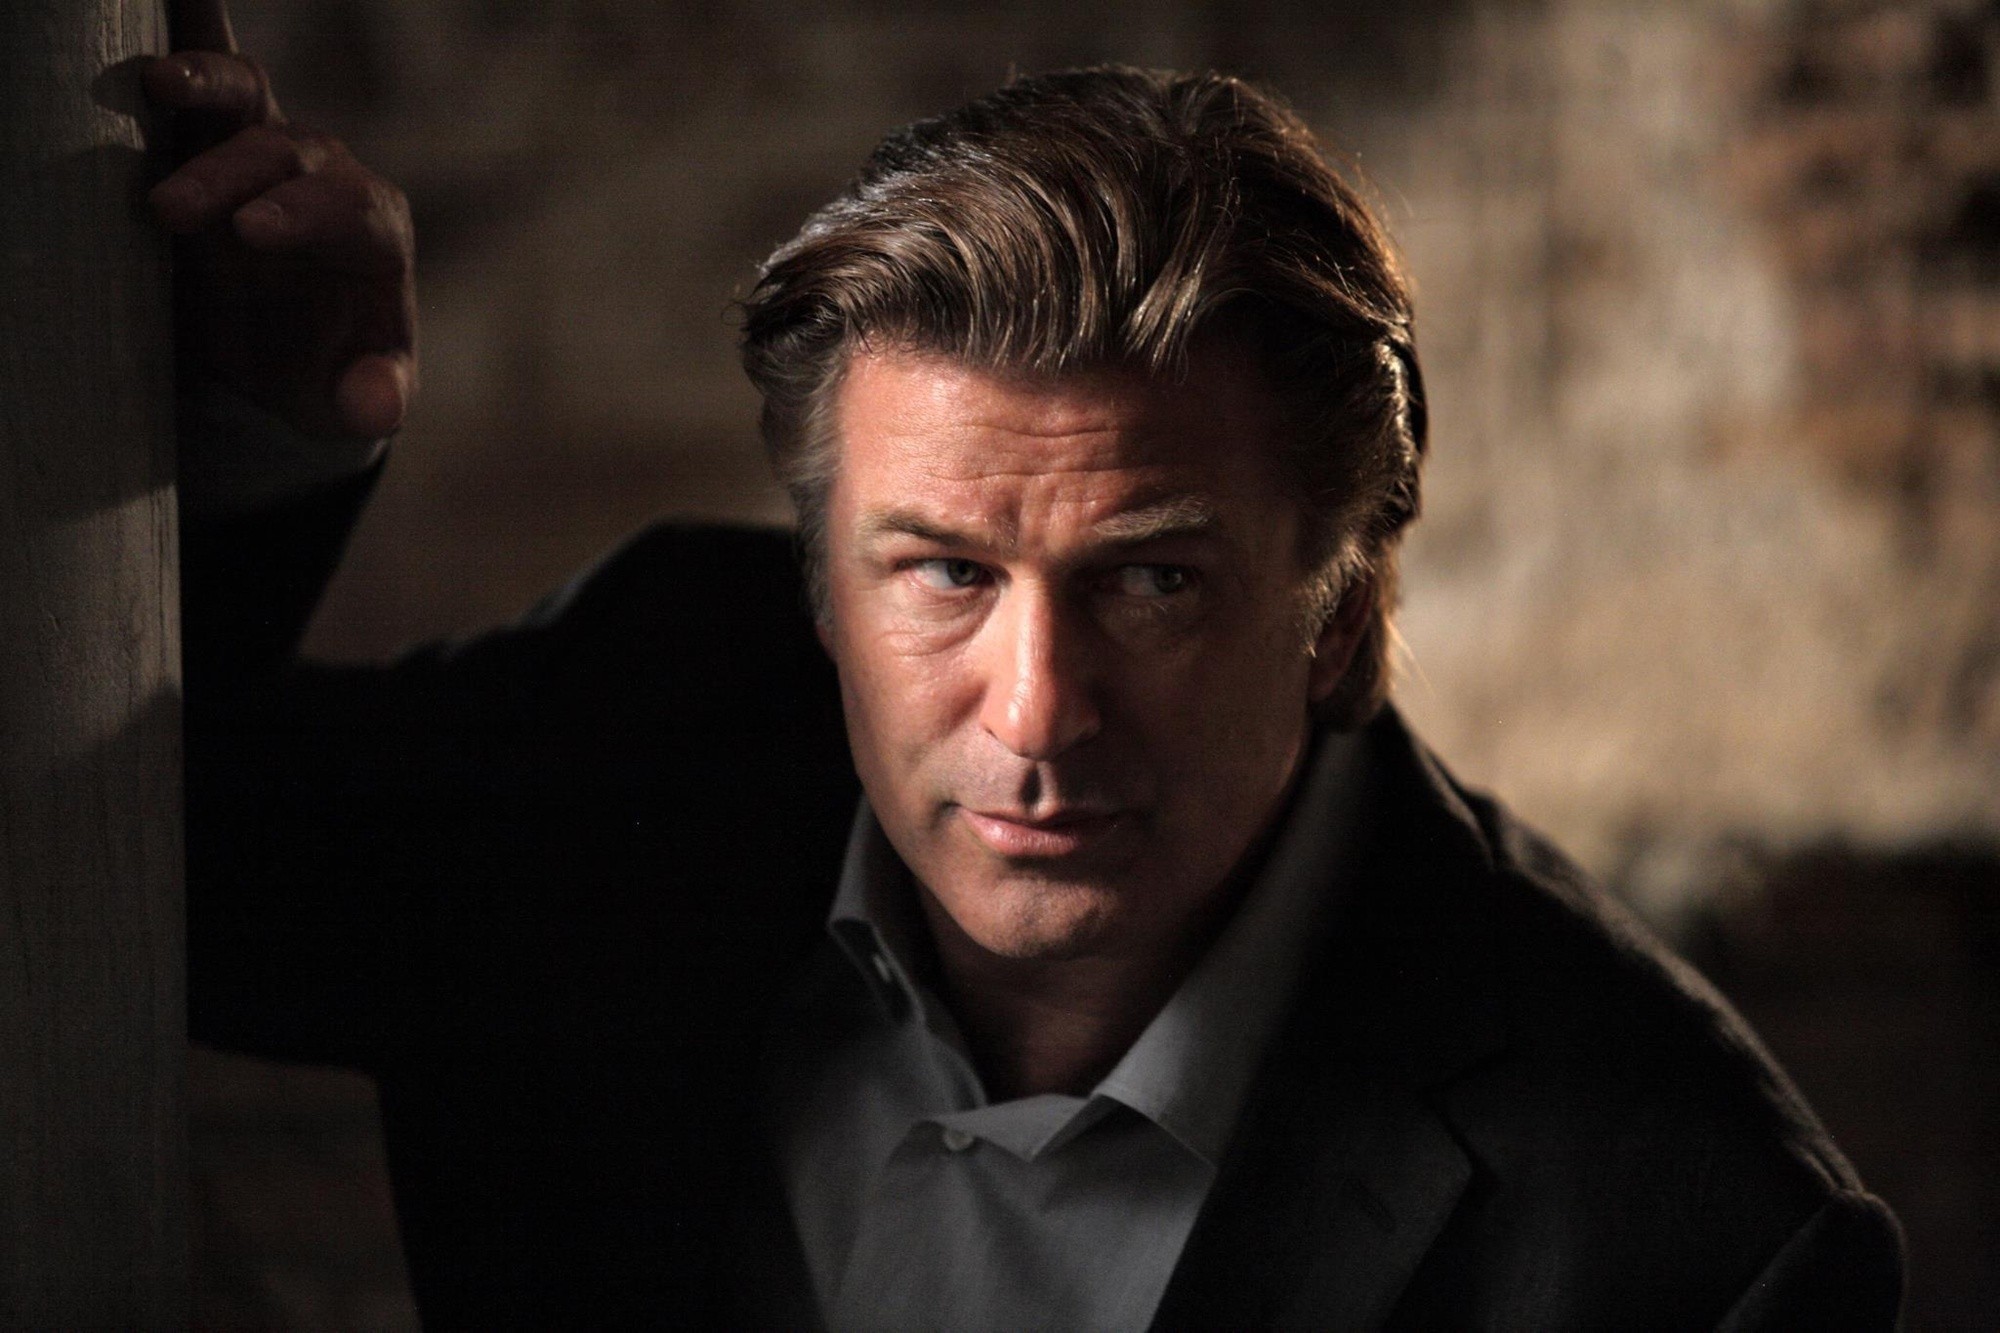 Alec Baldwin in Sony Pictures Classics' To Rome with Love (2012)